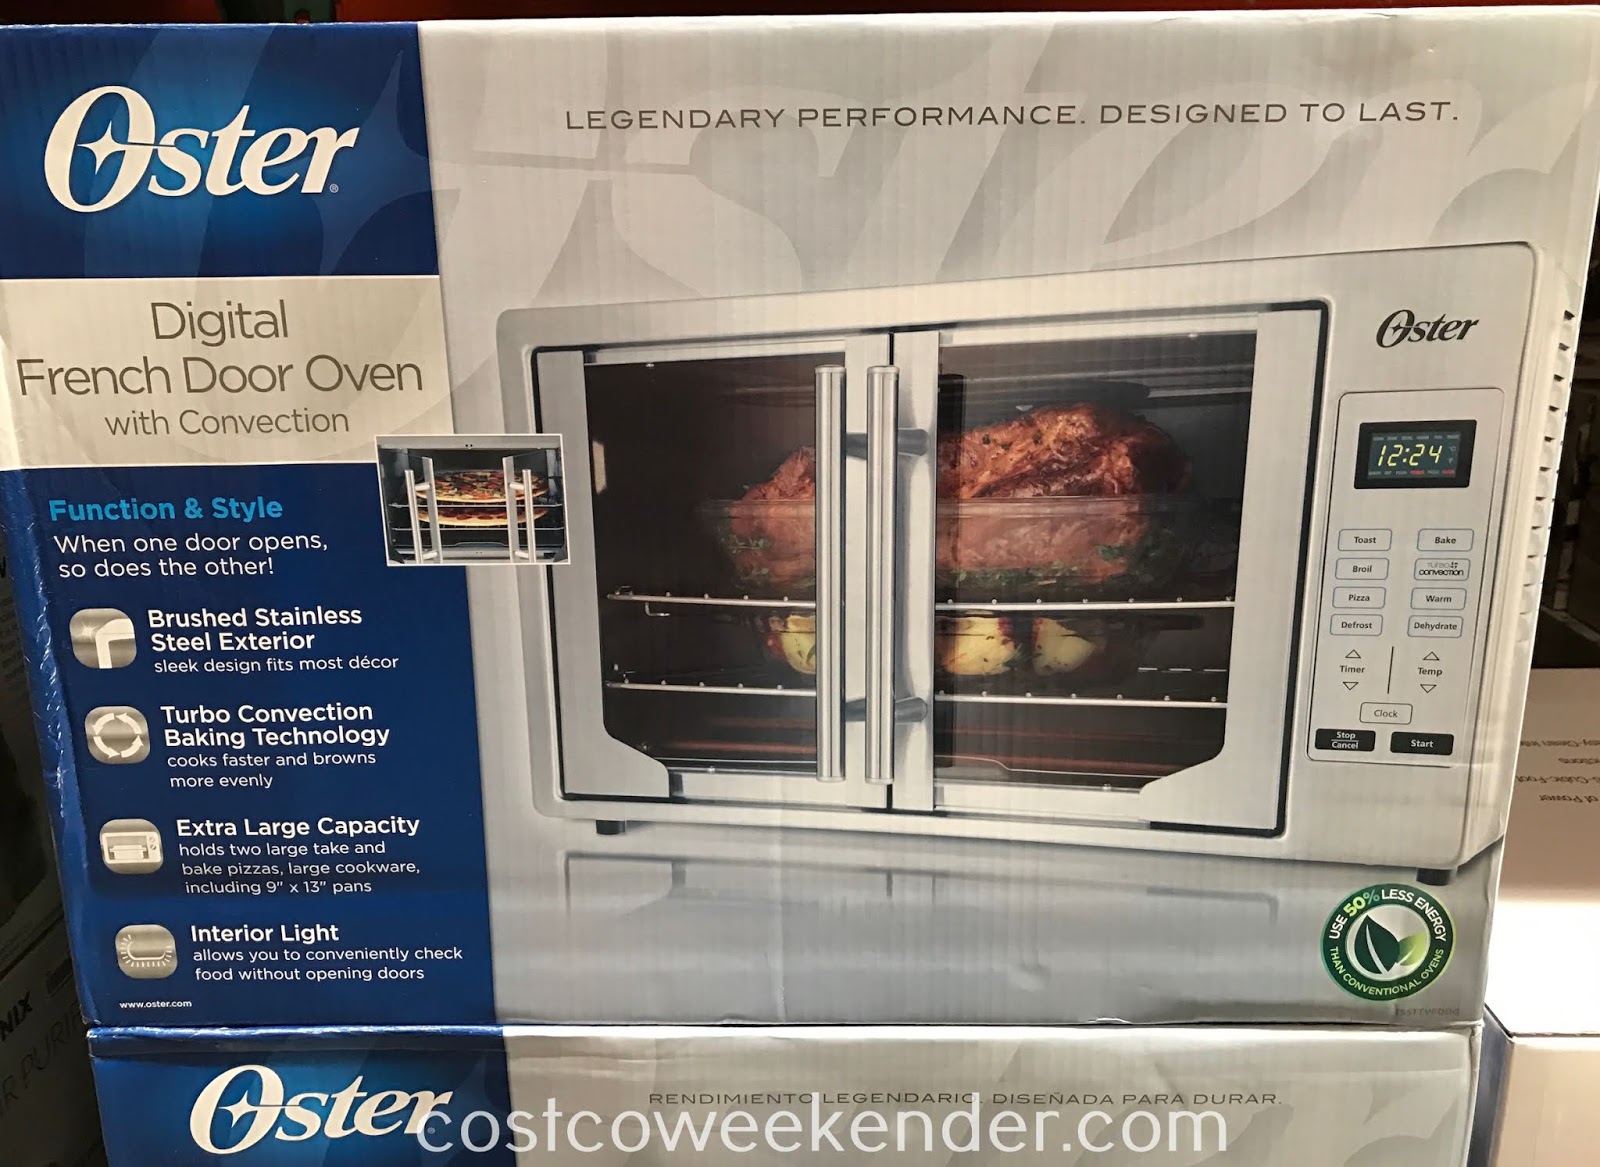 Oster Digital French Door Oven With Convection Costco Weekender